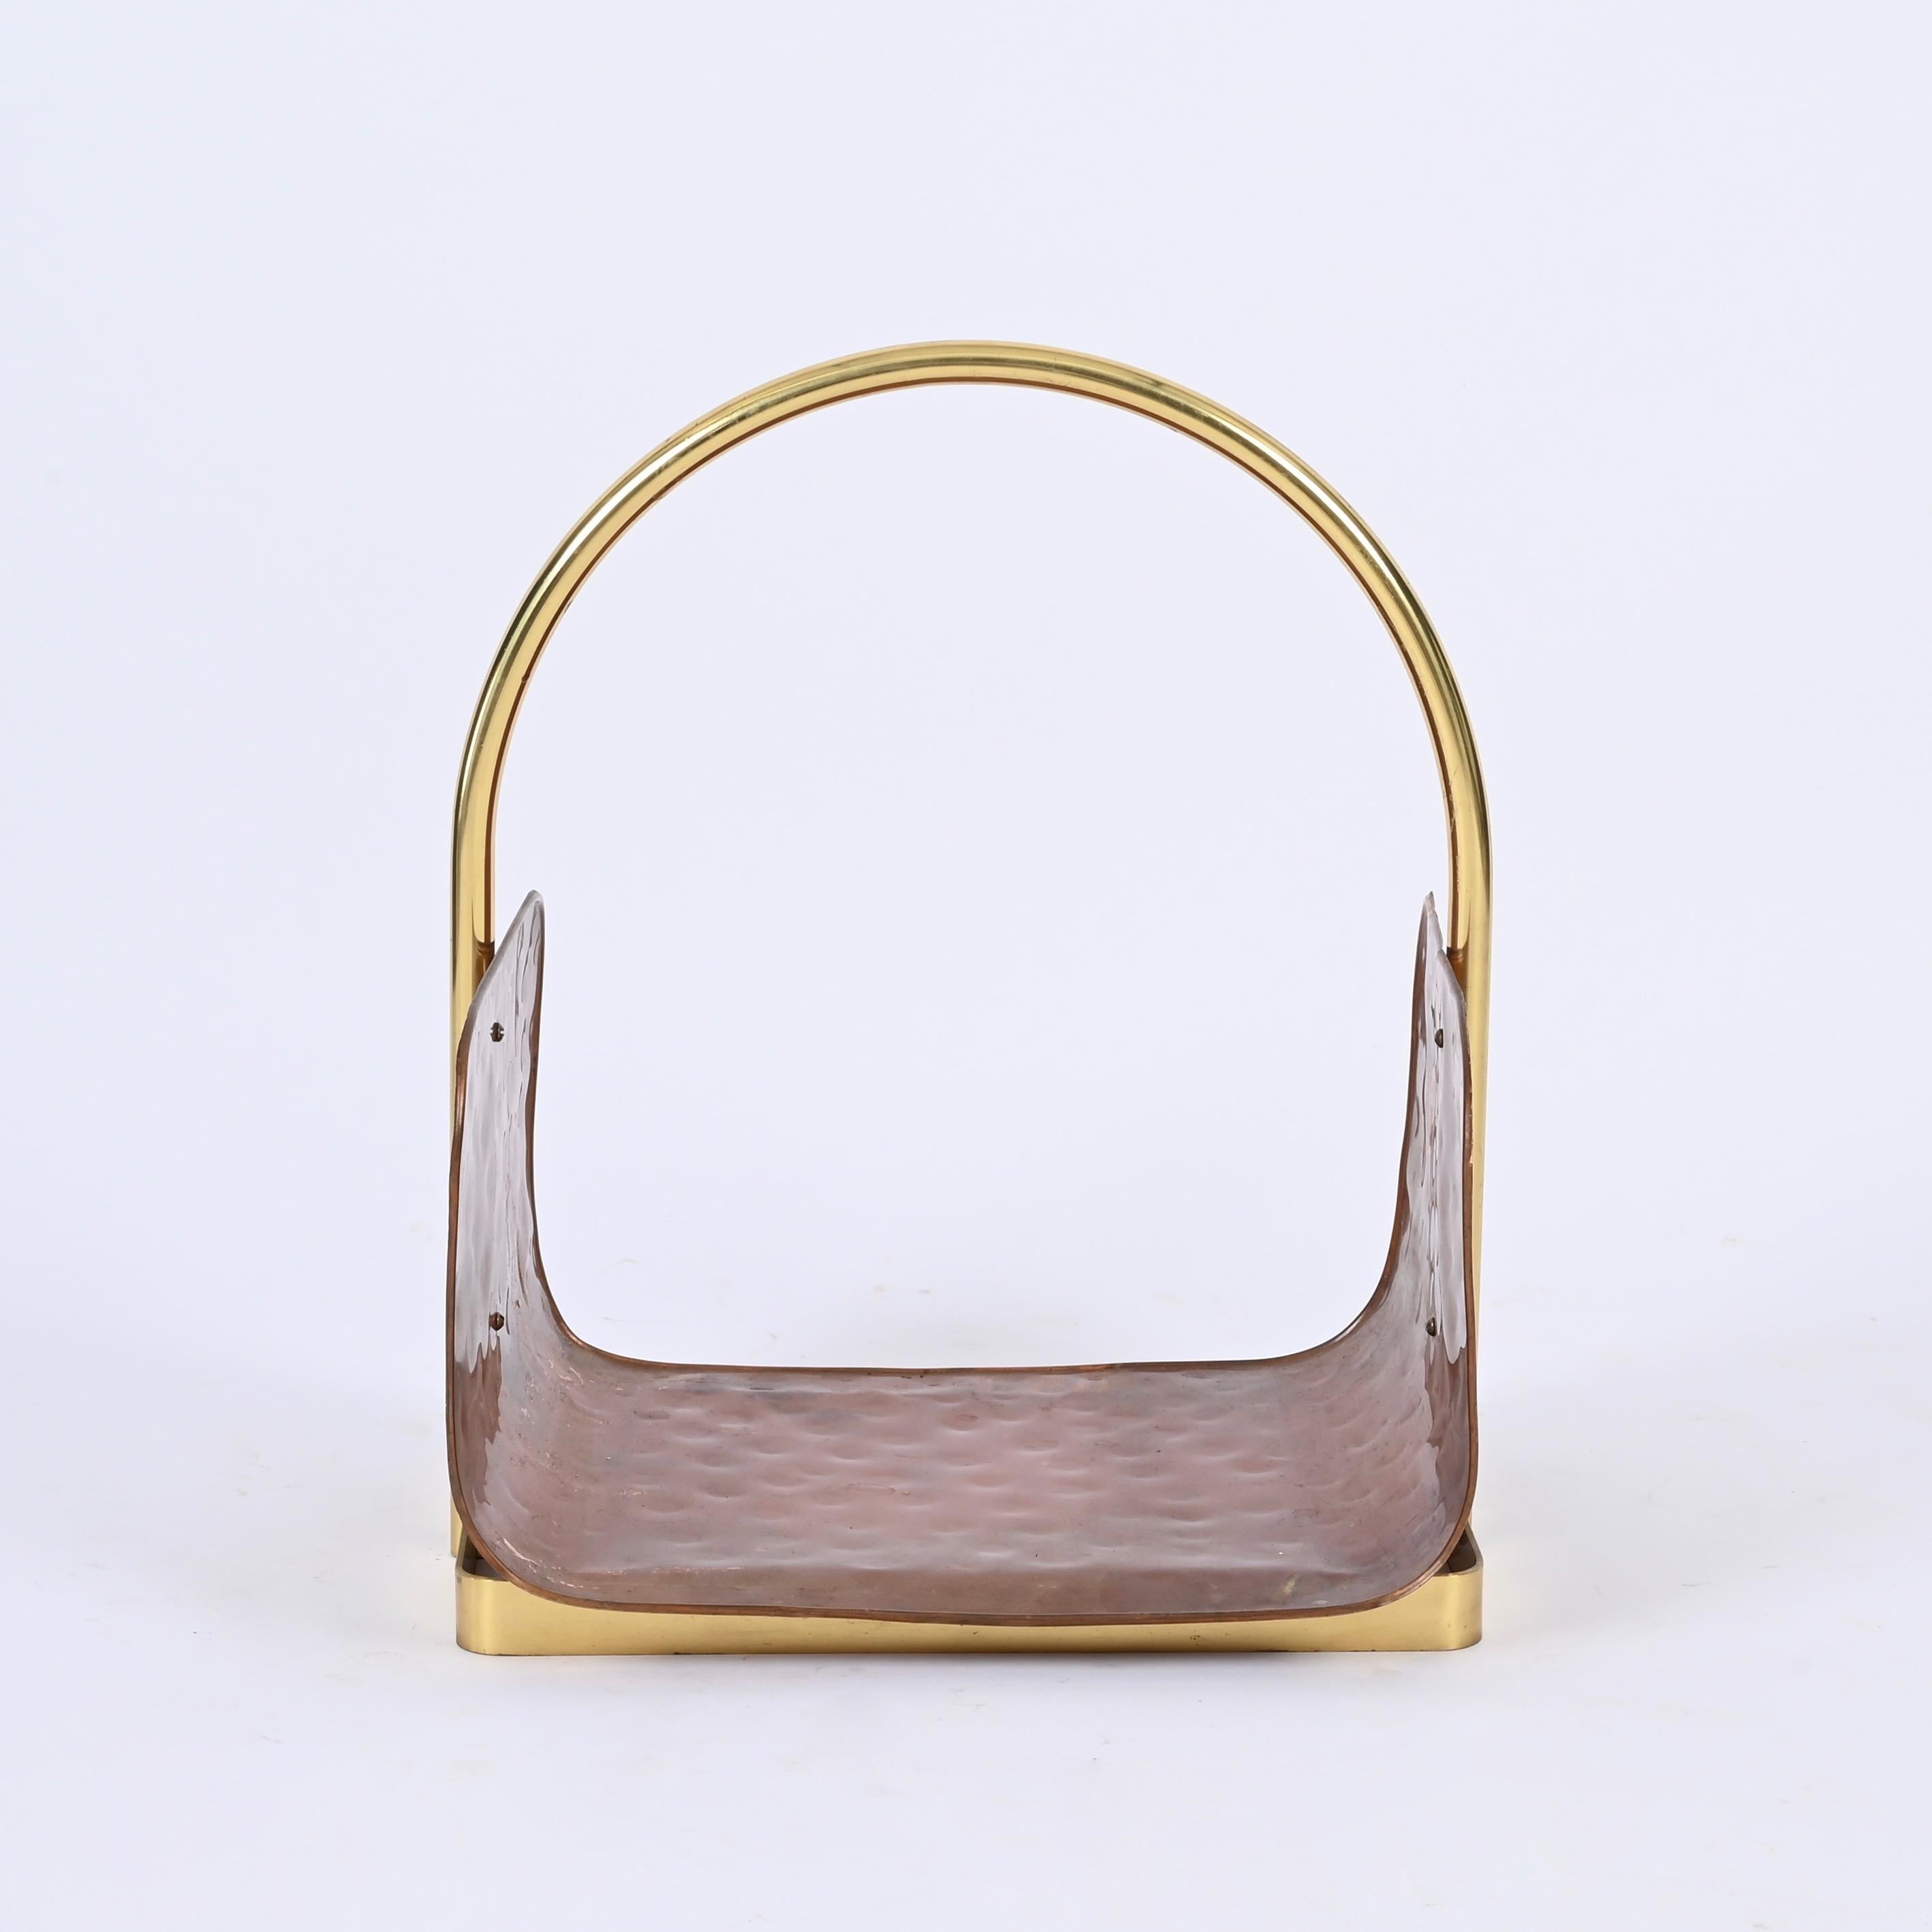 Midcentury Italian Magazine Rack in Hammered Copper and Brass, Italy 1970s For Sale 9